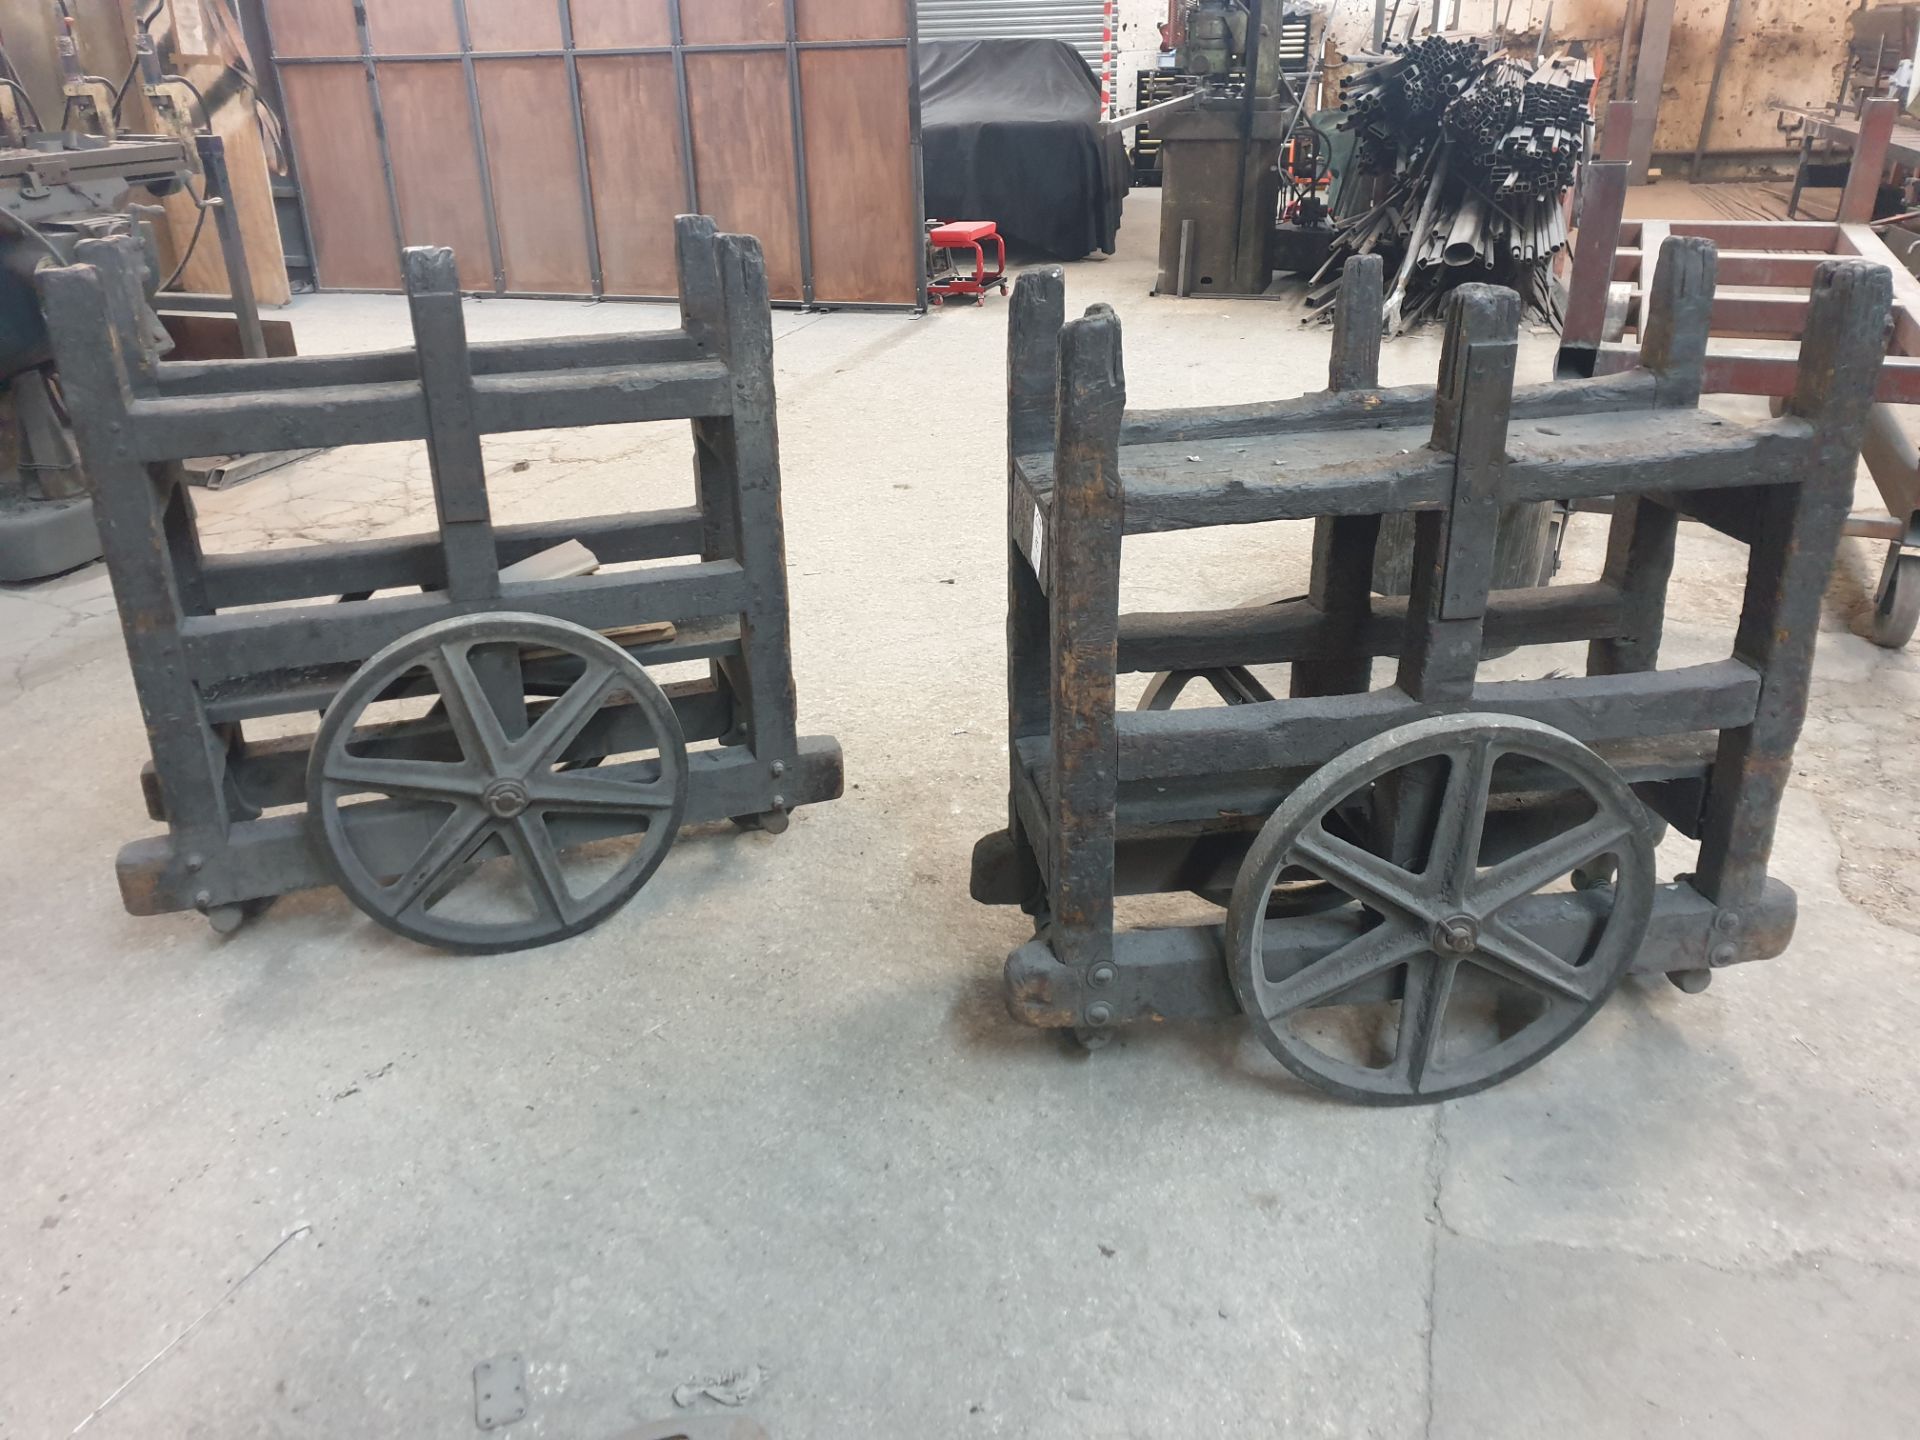 2 x Vintage trolleys - will hold a ton